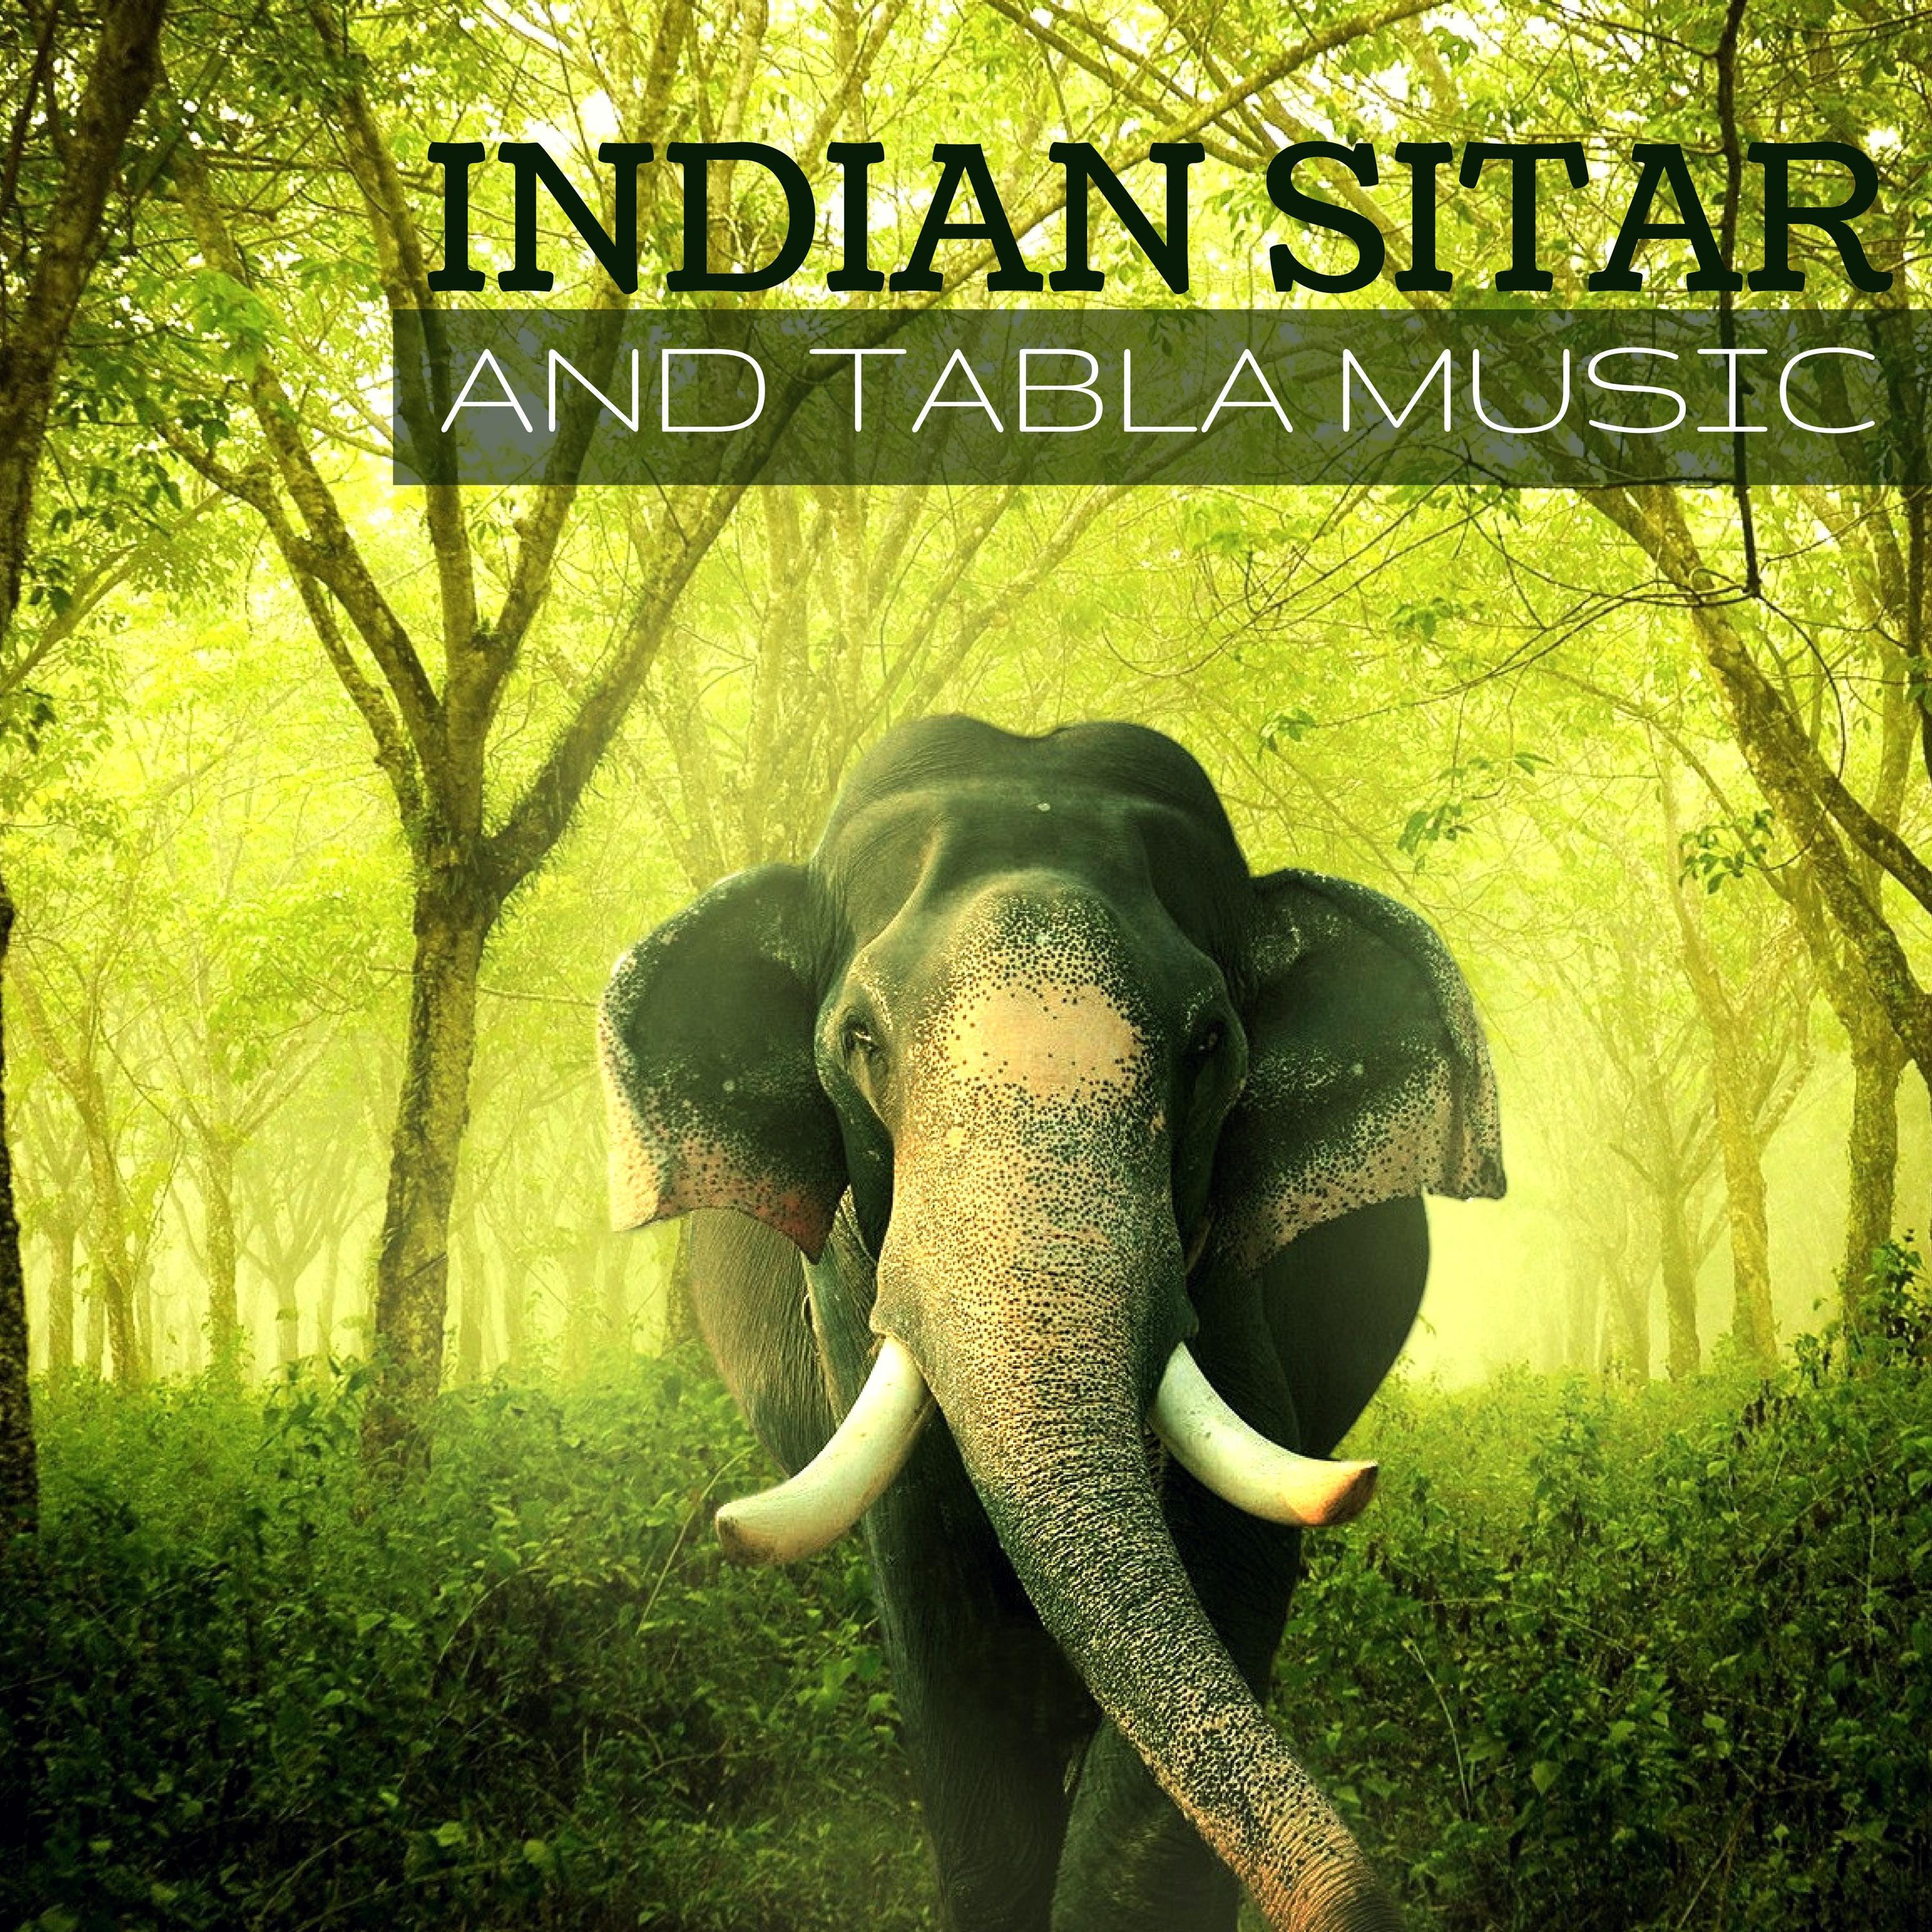 Indian Sitar and Tabla Music - Oriental World Music from Indian Exotic Hindi Folk Tradition